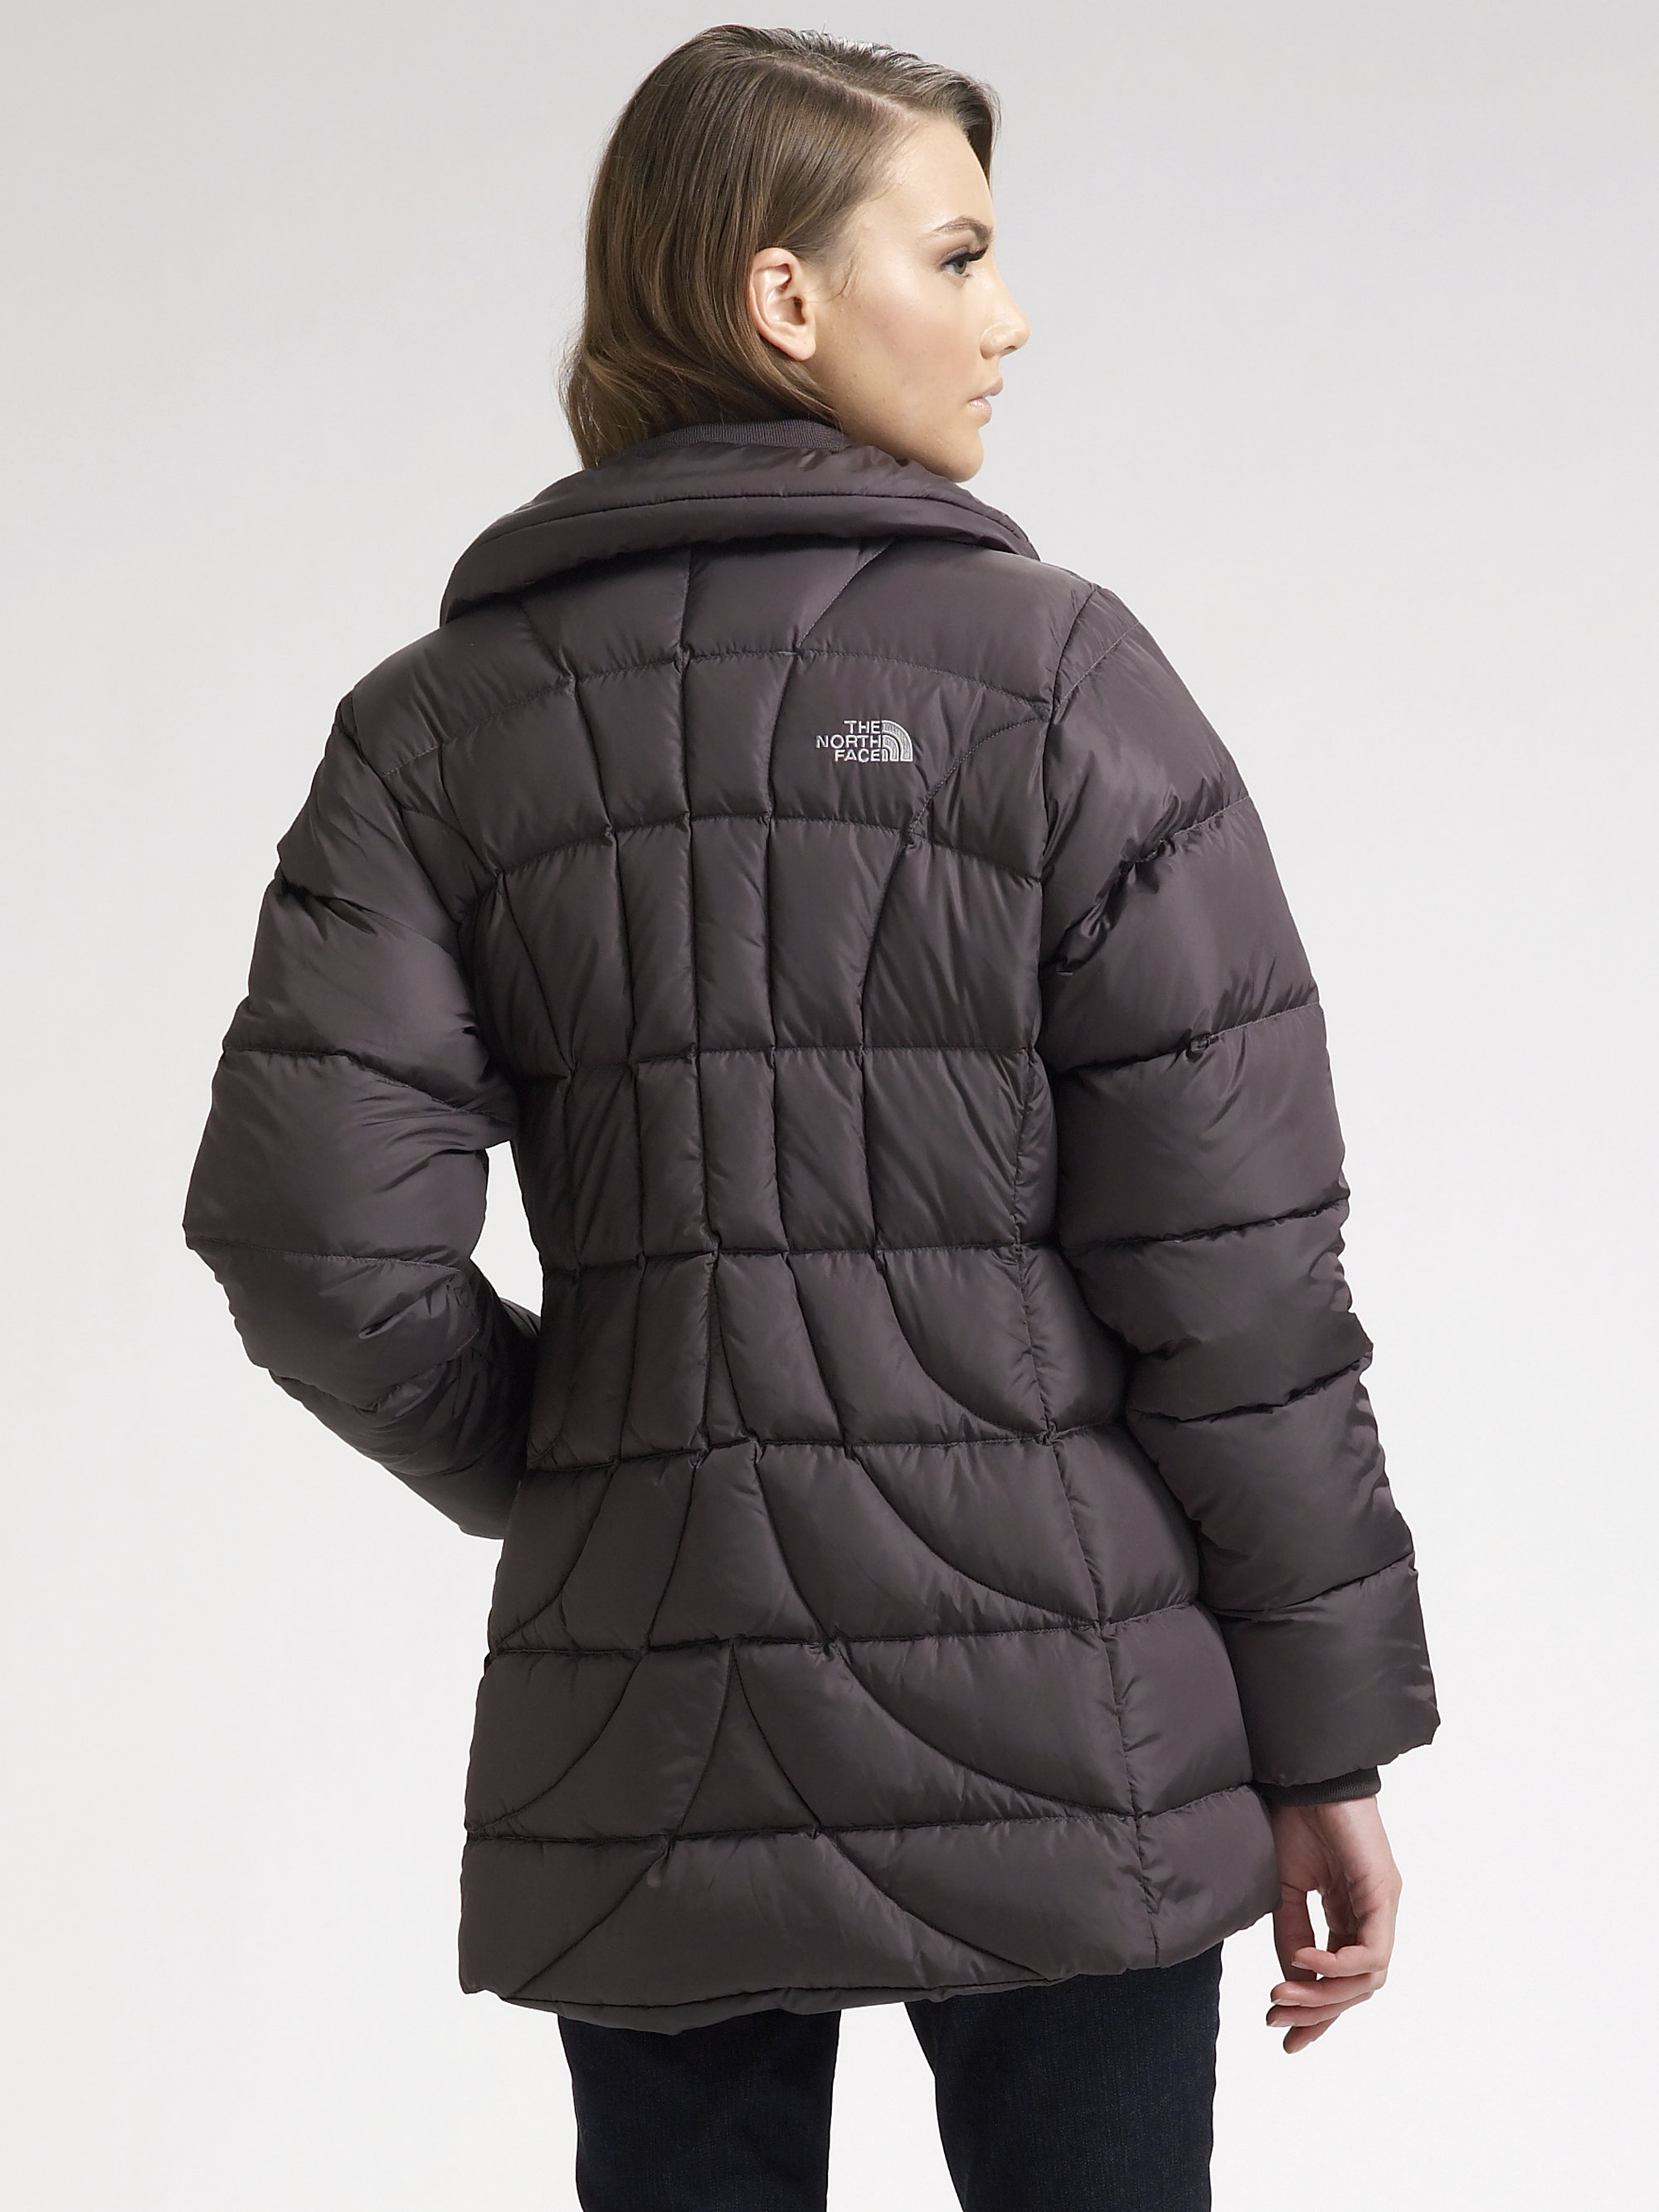 Lyst - The North Face Quilted Puffer Jacket in Gray